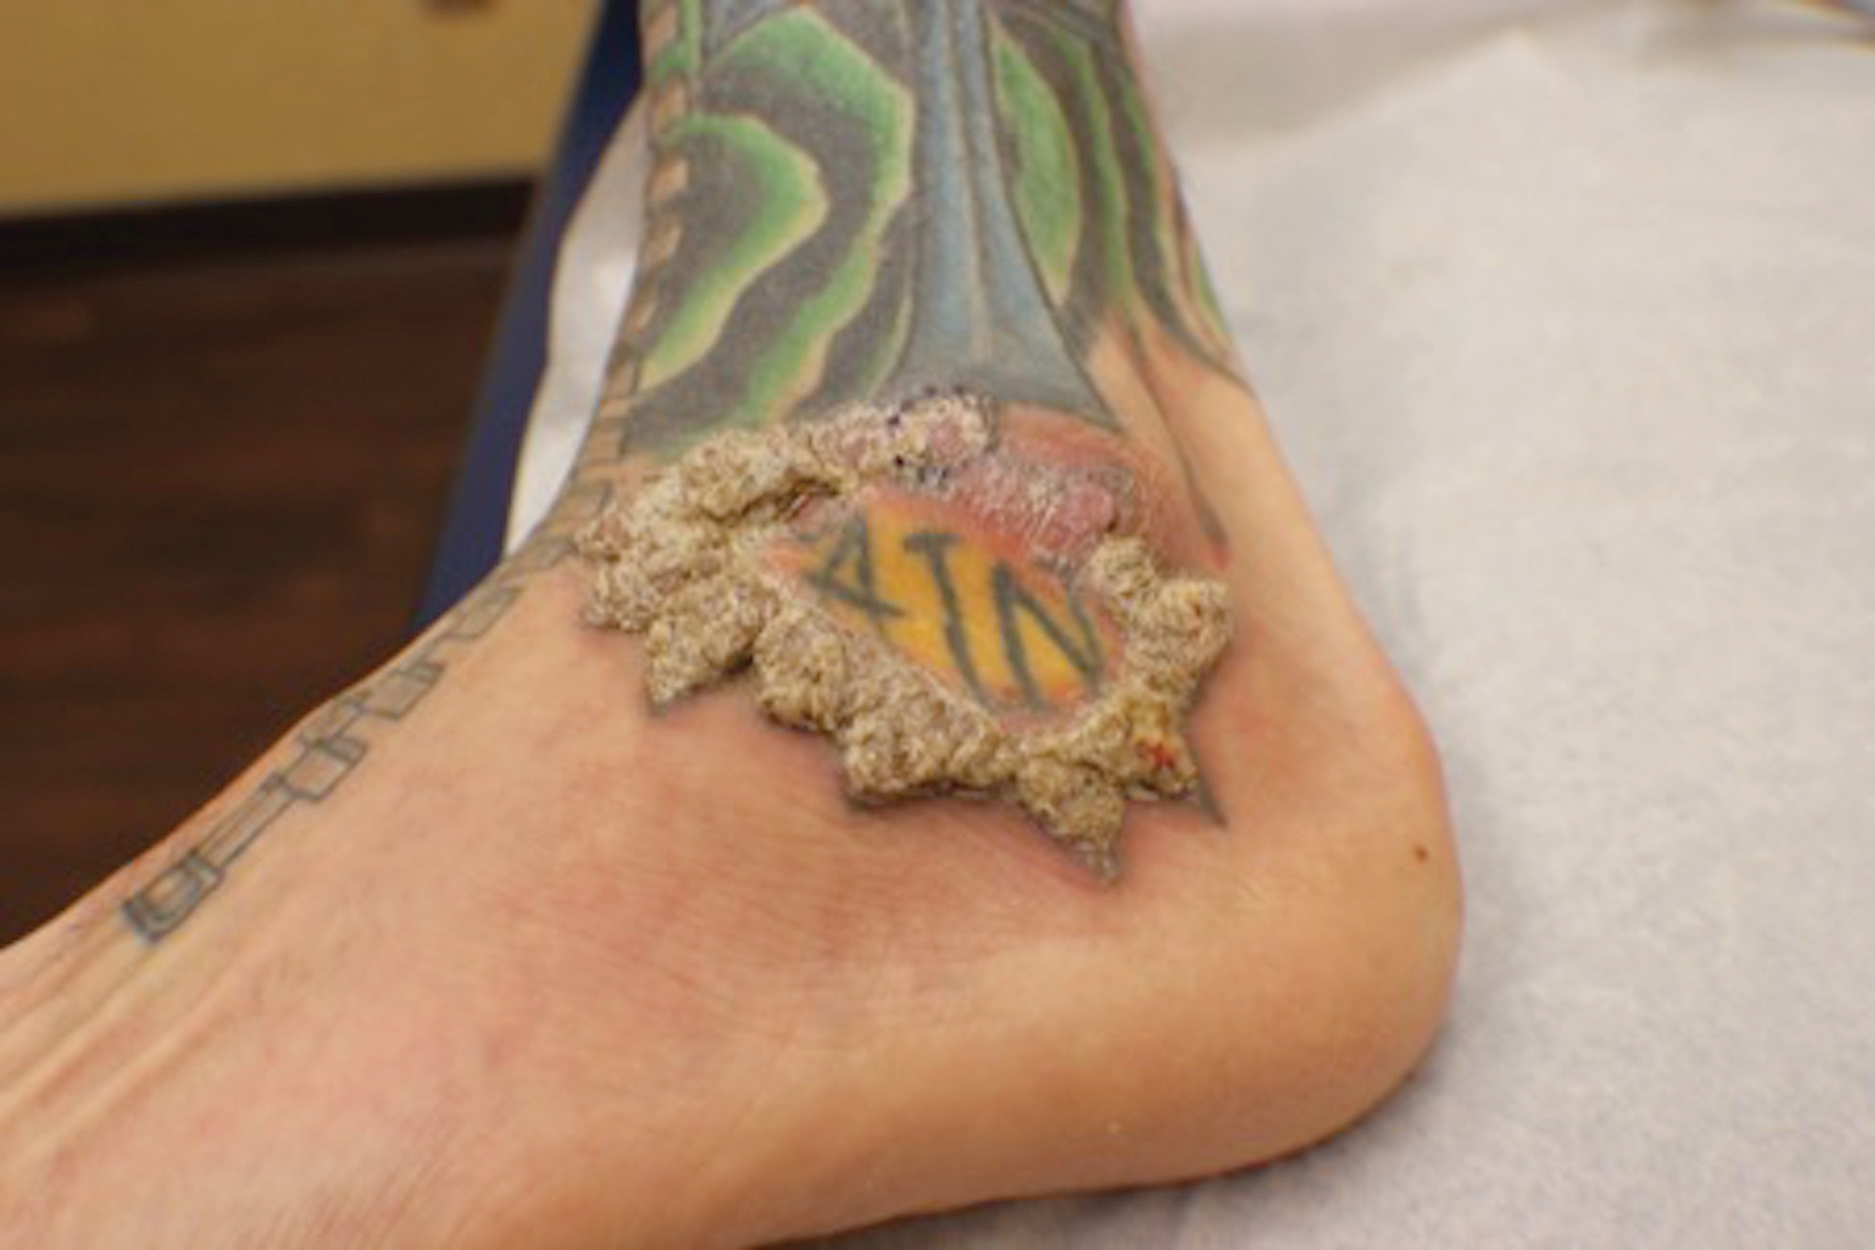 Verruciform Plaques Within a Tattoo of an HIV-Positive Patient | MDedge  Dermatology